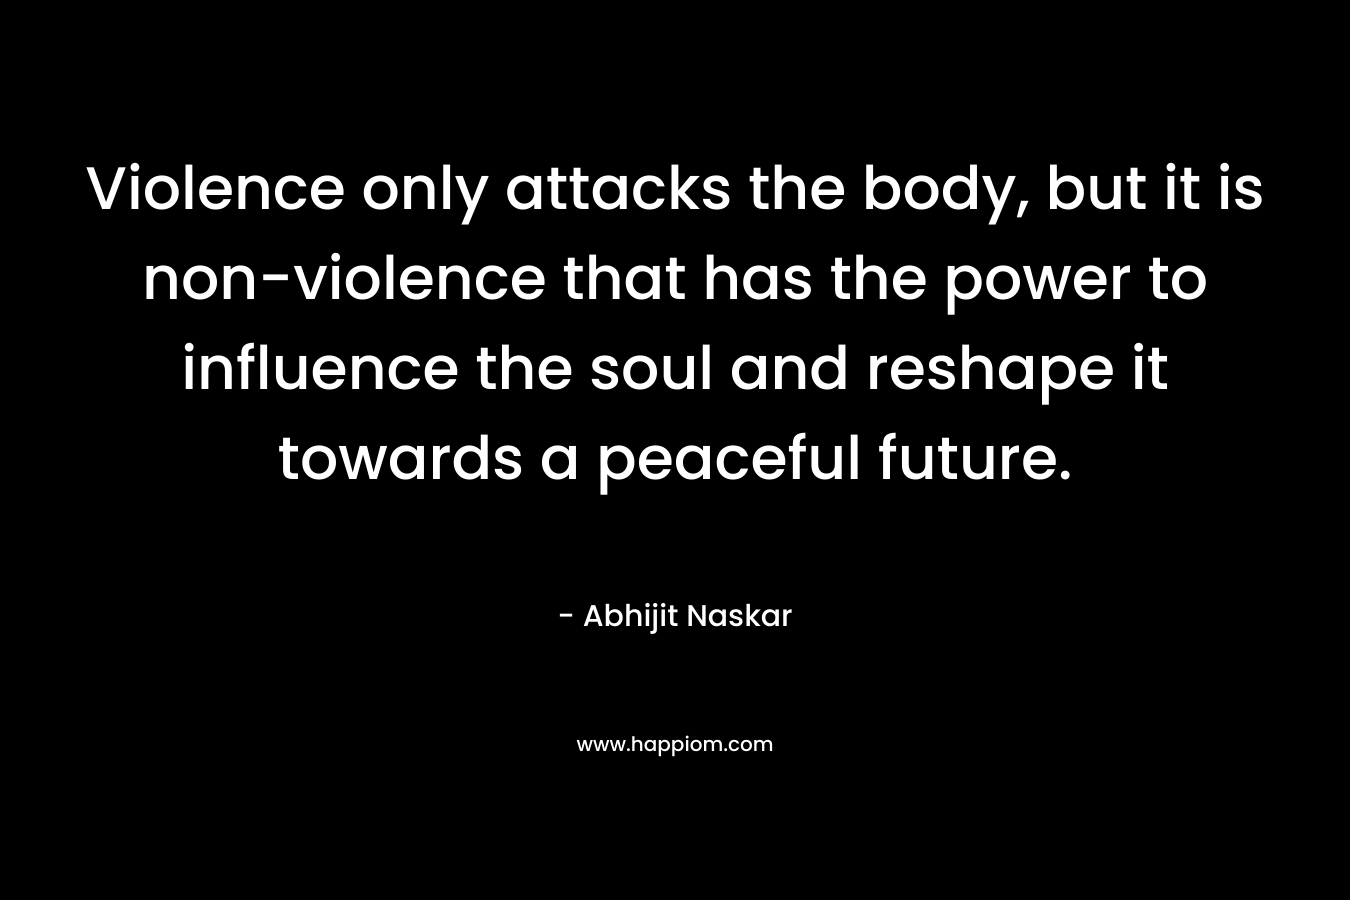 Violence only attacks the body, but it is non-violence that has the power to influence the soul and reshape it towards a peaceful future. – Abhijit Naskar